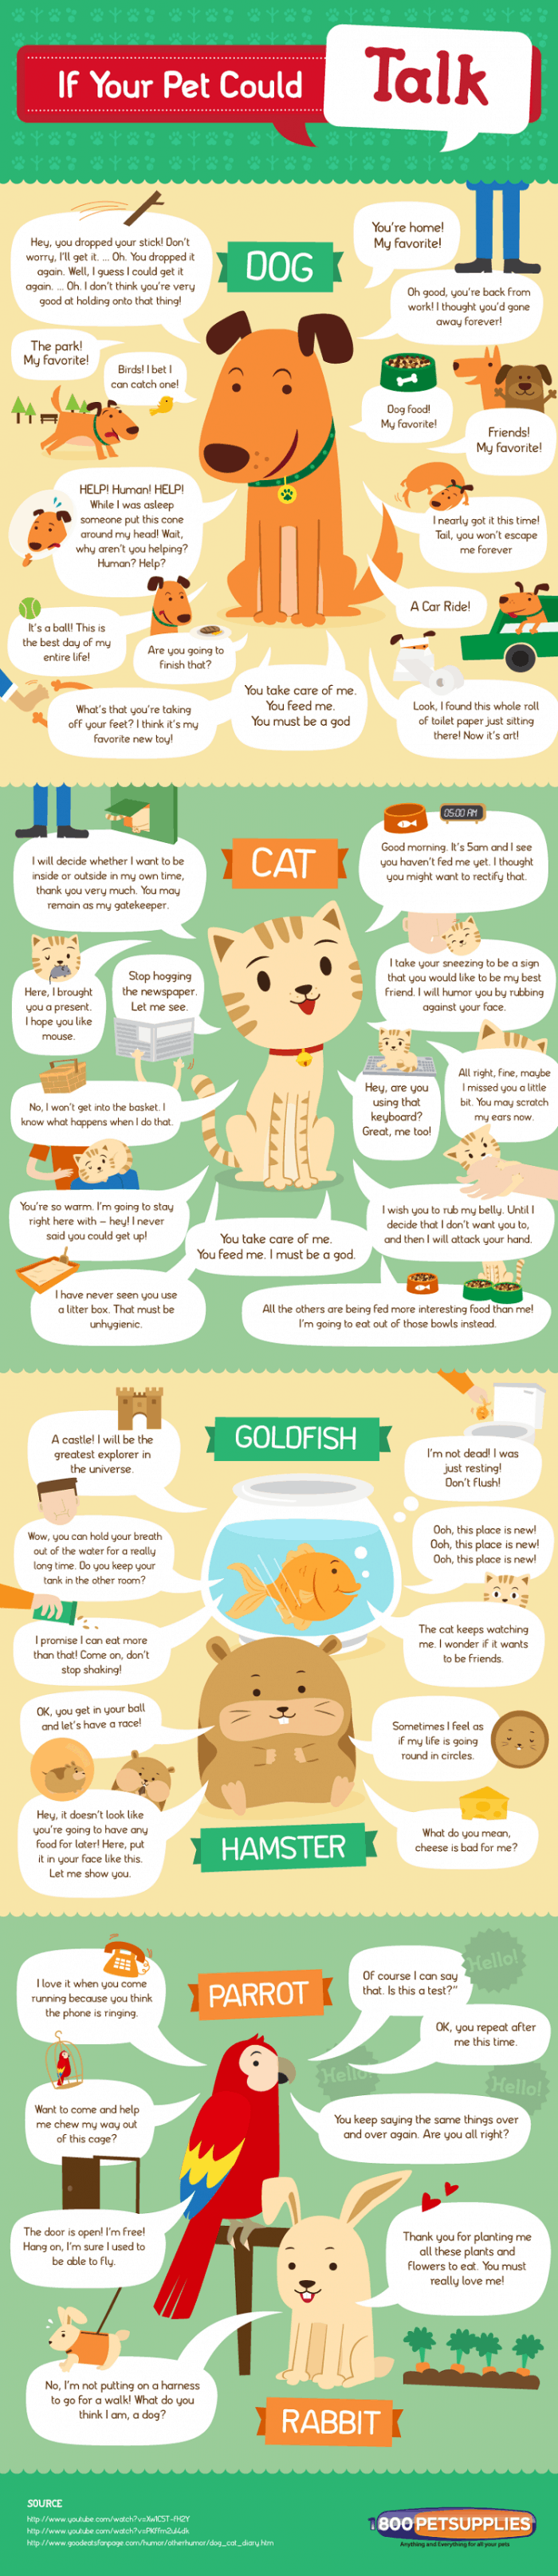 If your pet could talk - infographic